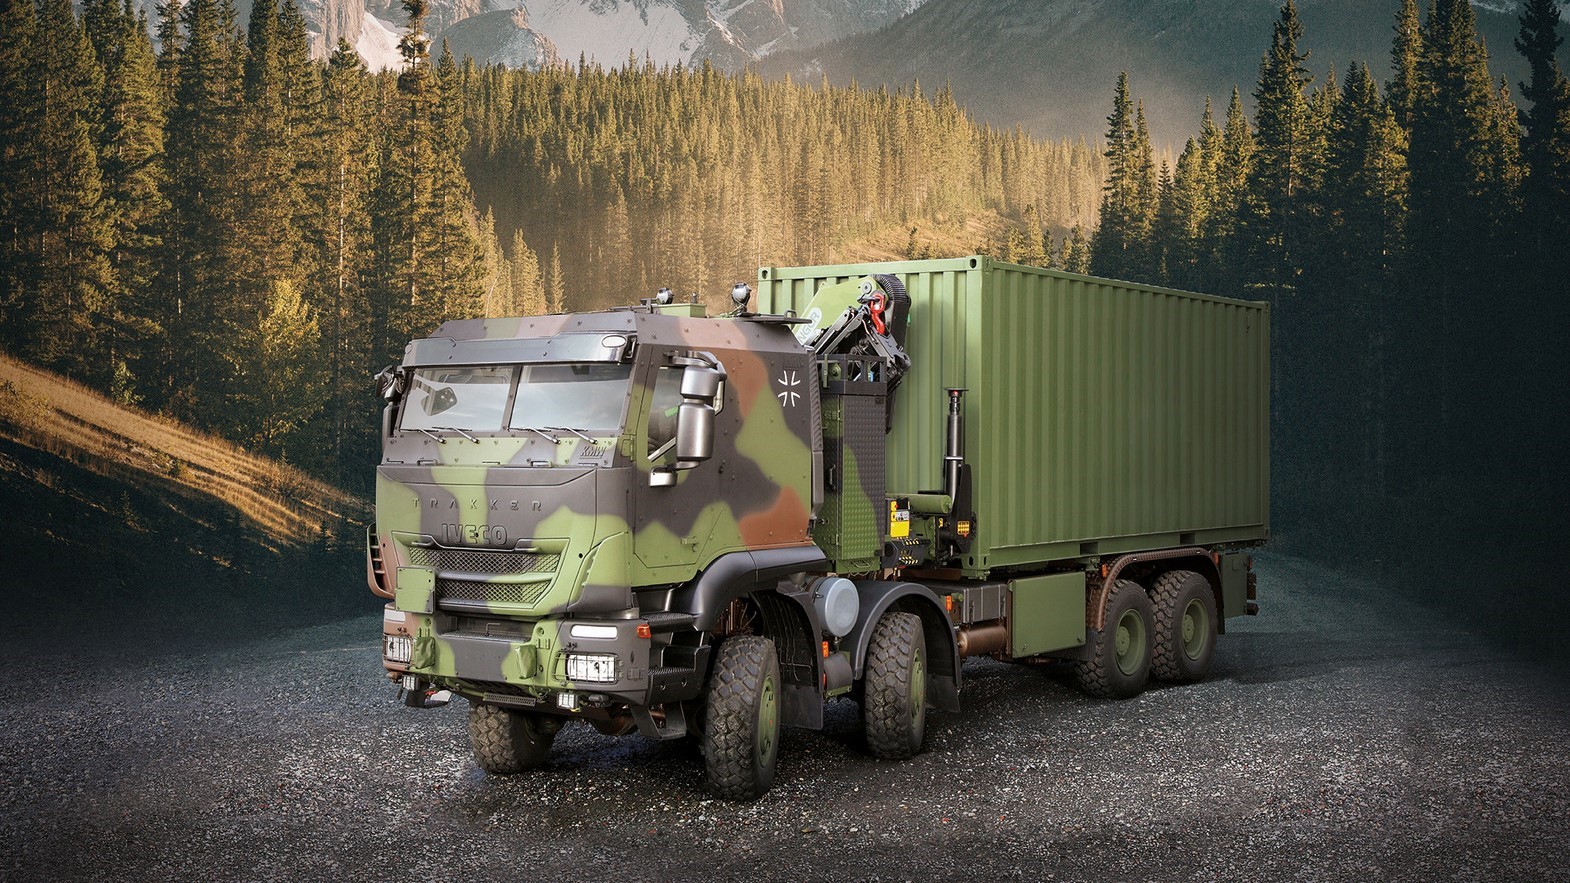 Iveco Defence Vehicles supplies third generation protected military GTF-8x8 (ZLK 15t) trucks to the German Army